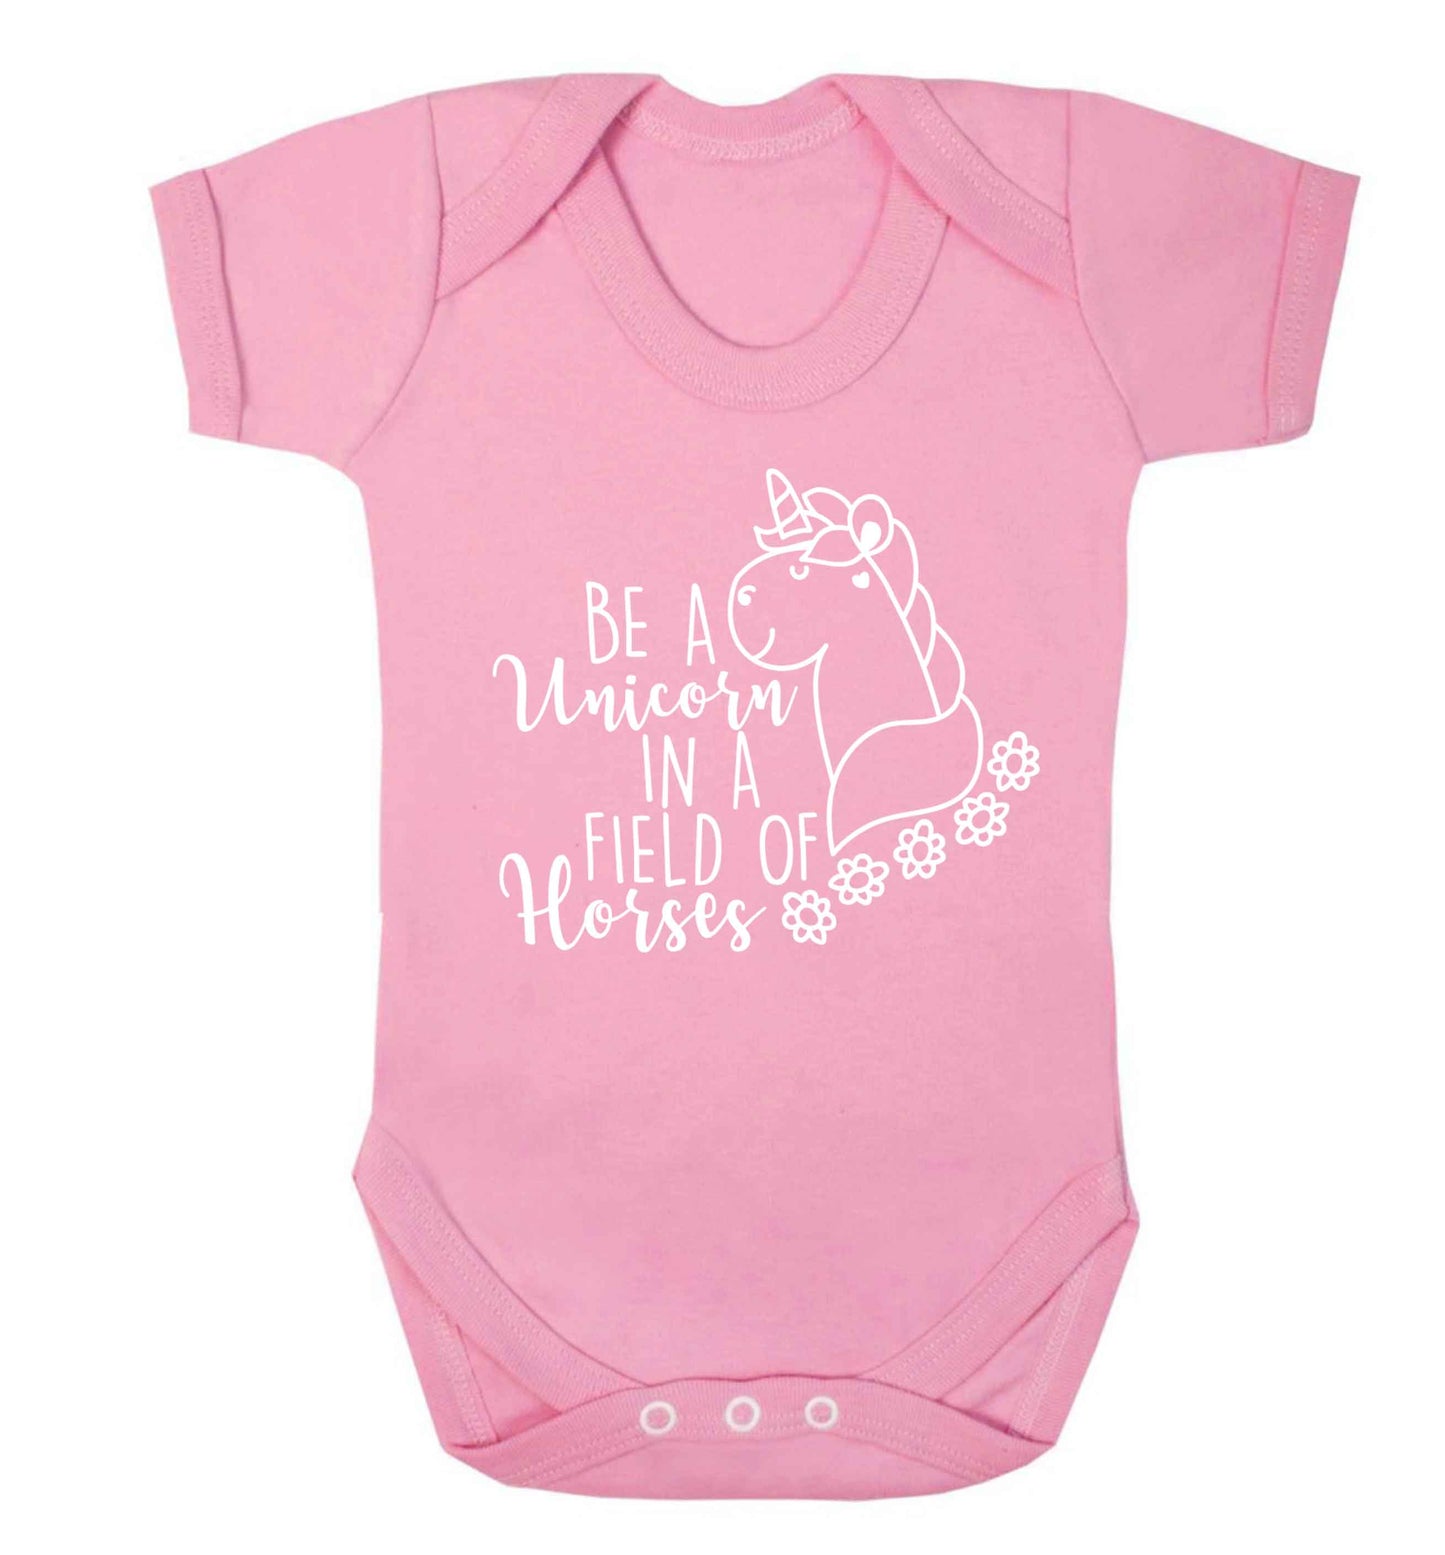 Be a unicorn in a field of horses Baby Vest pale pink 18-24 months